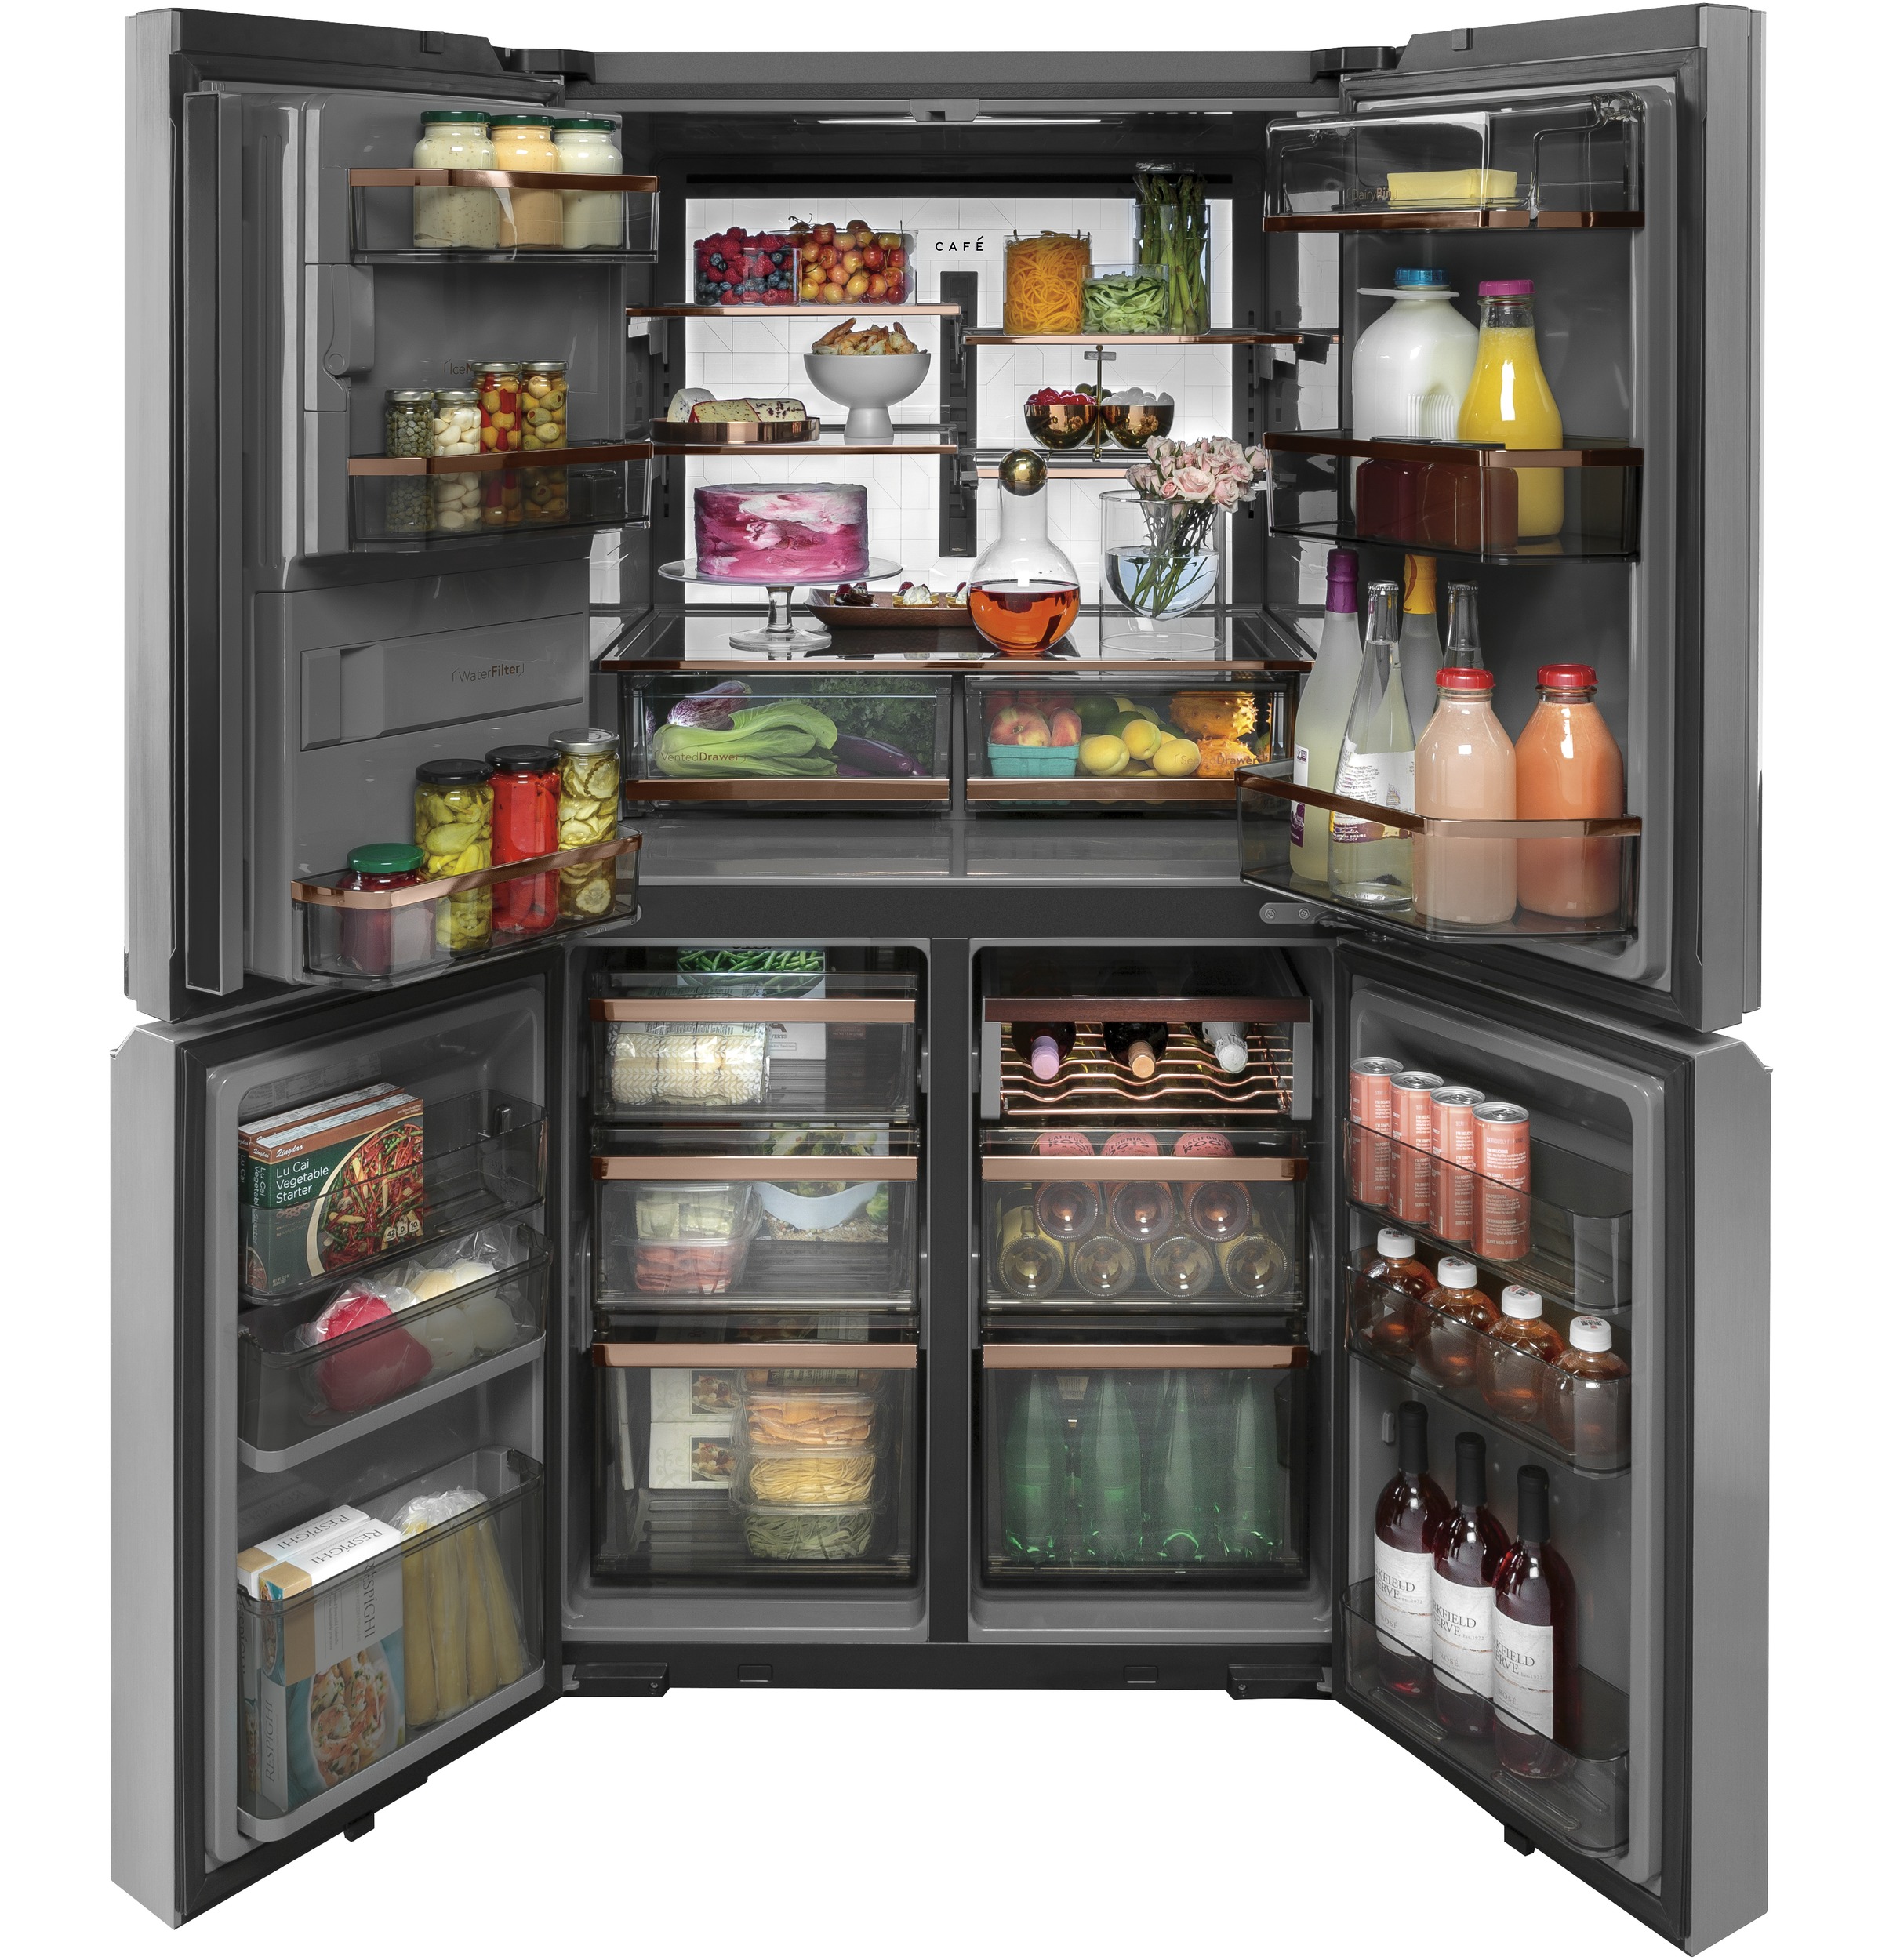 Top 6 Best Rated Refrigerators for 2021 Friedmans Appliance Bay